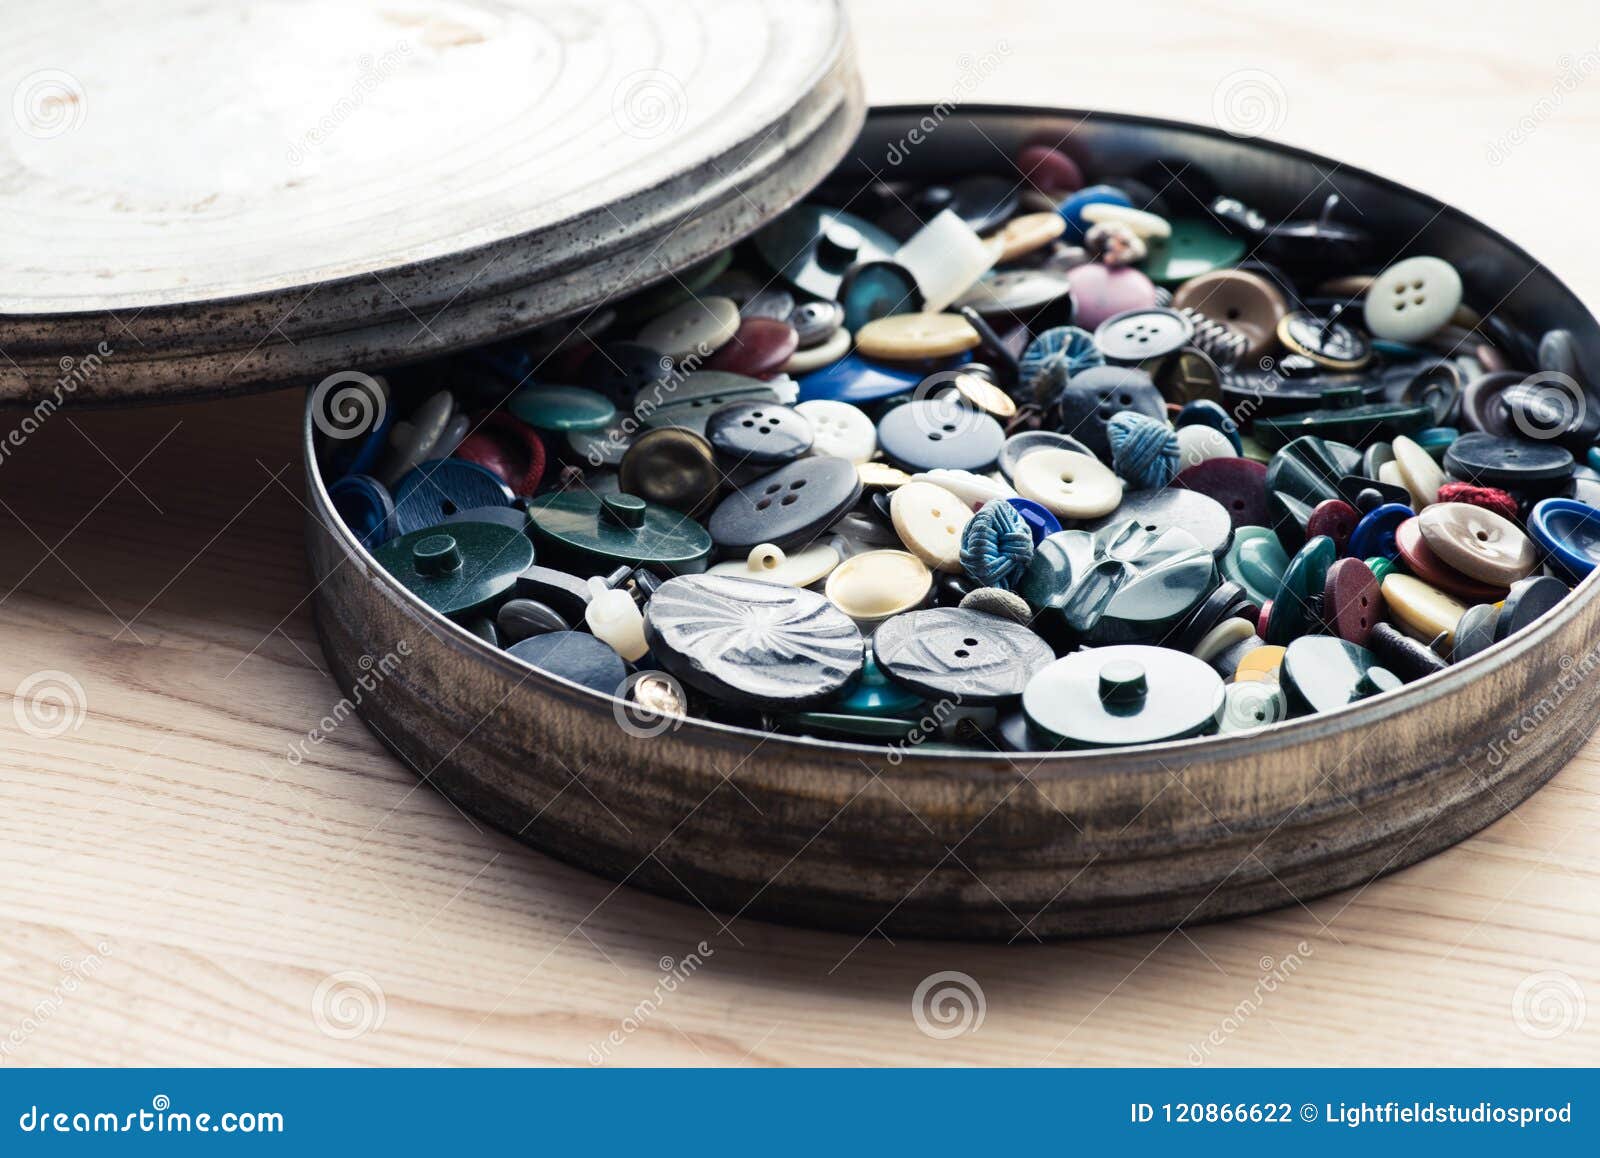 Lot of Buttons in Circle Box Over Stock Photo - Image of metal, wooden ...